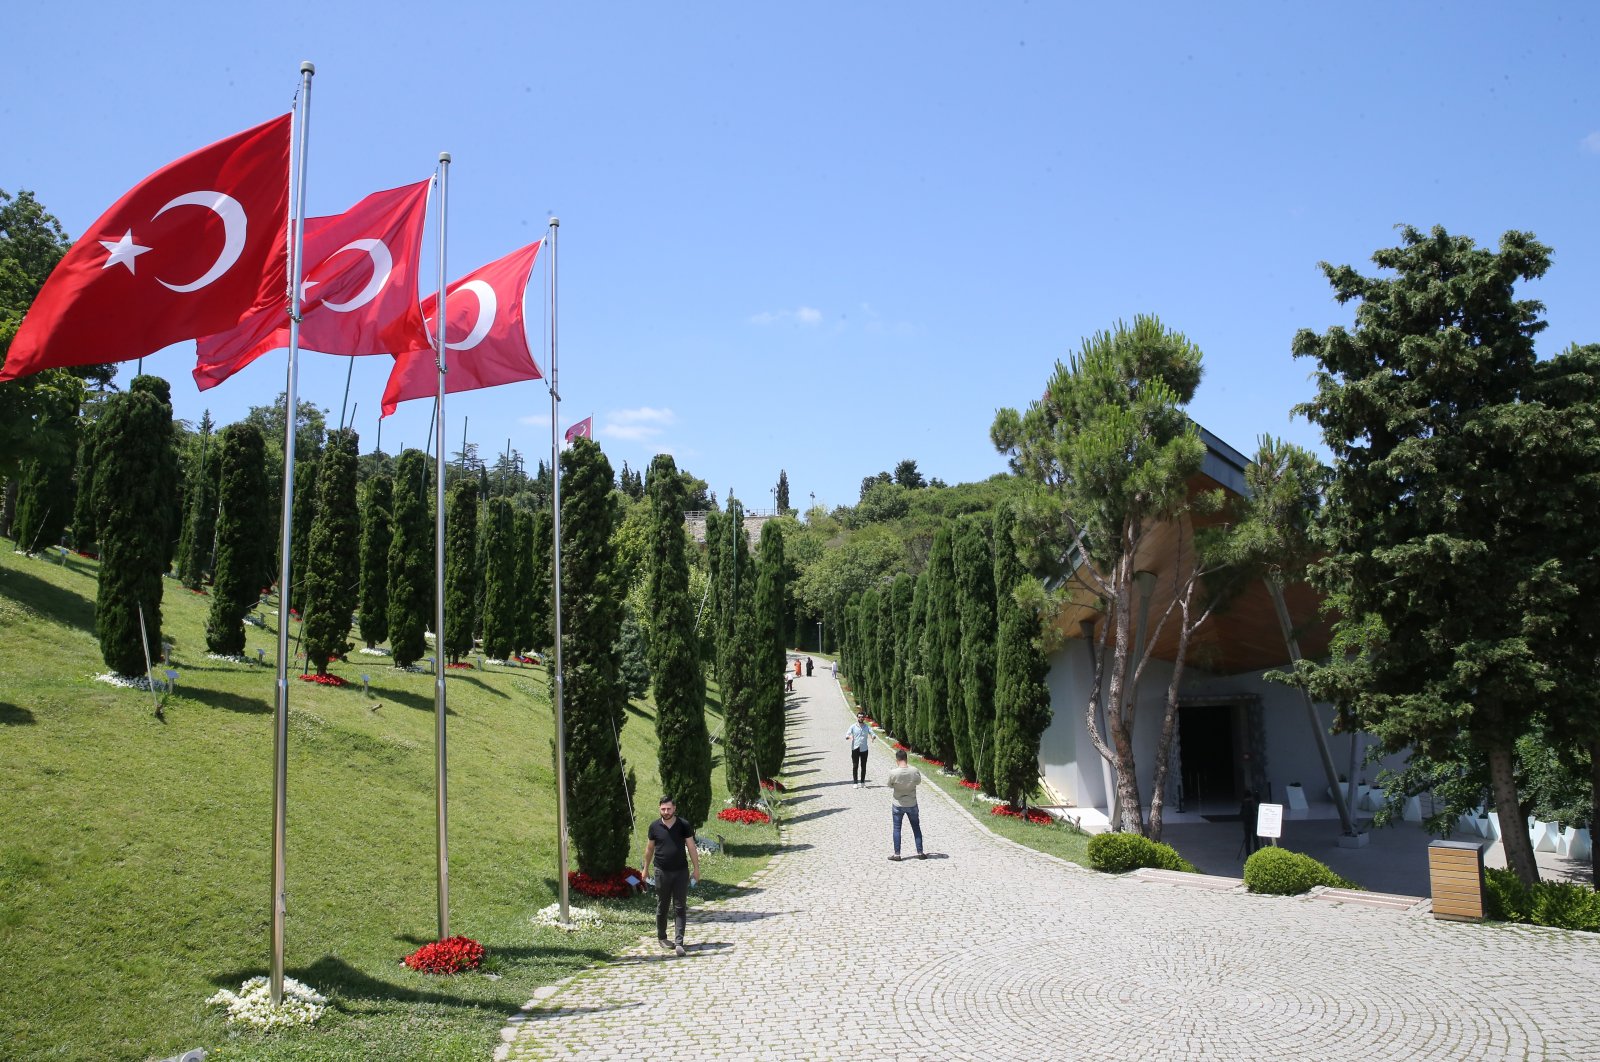 July 15 Museum reminds its visitors the heinous coup attempt by the members of the Fetullah Terrorist Organization (FETÖ) on July 15, 2016. (AA Photo)